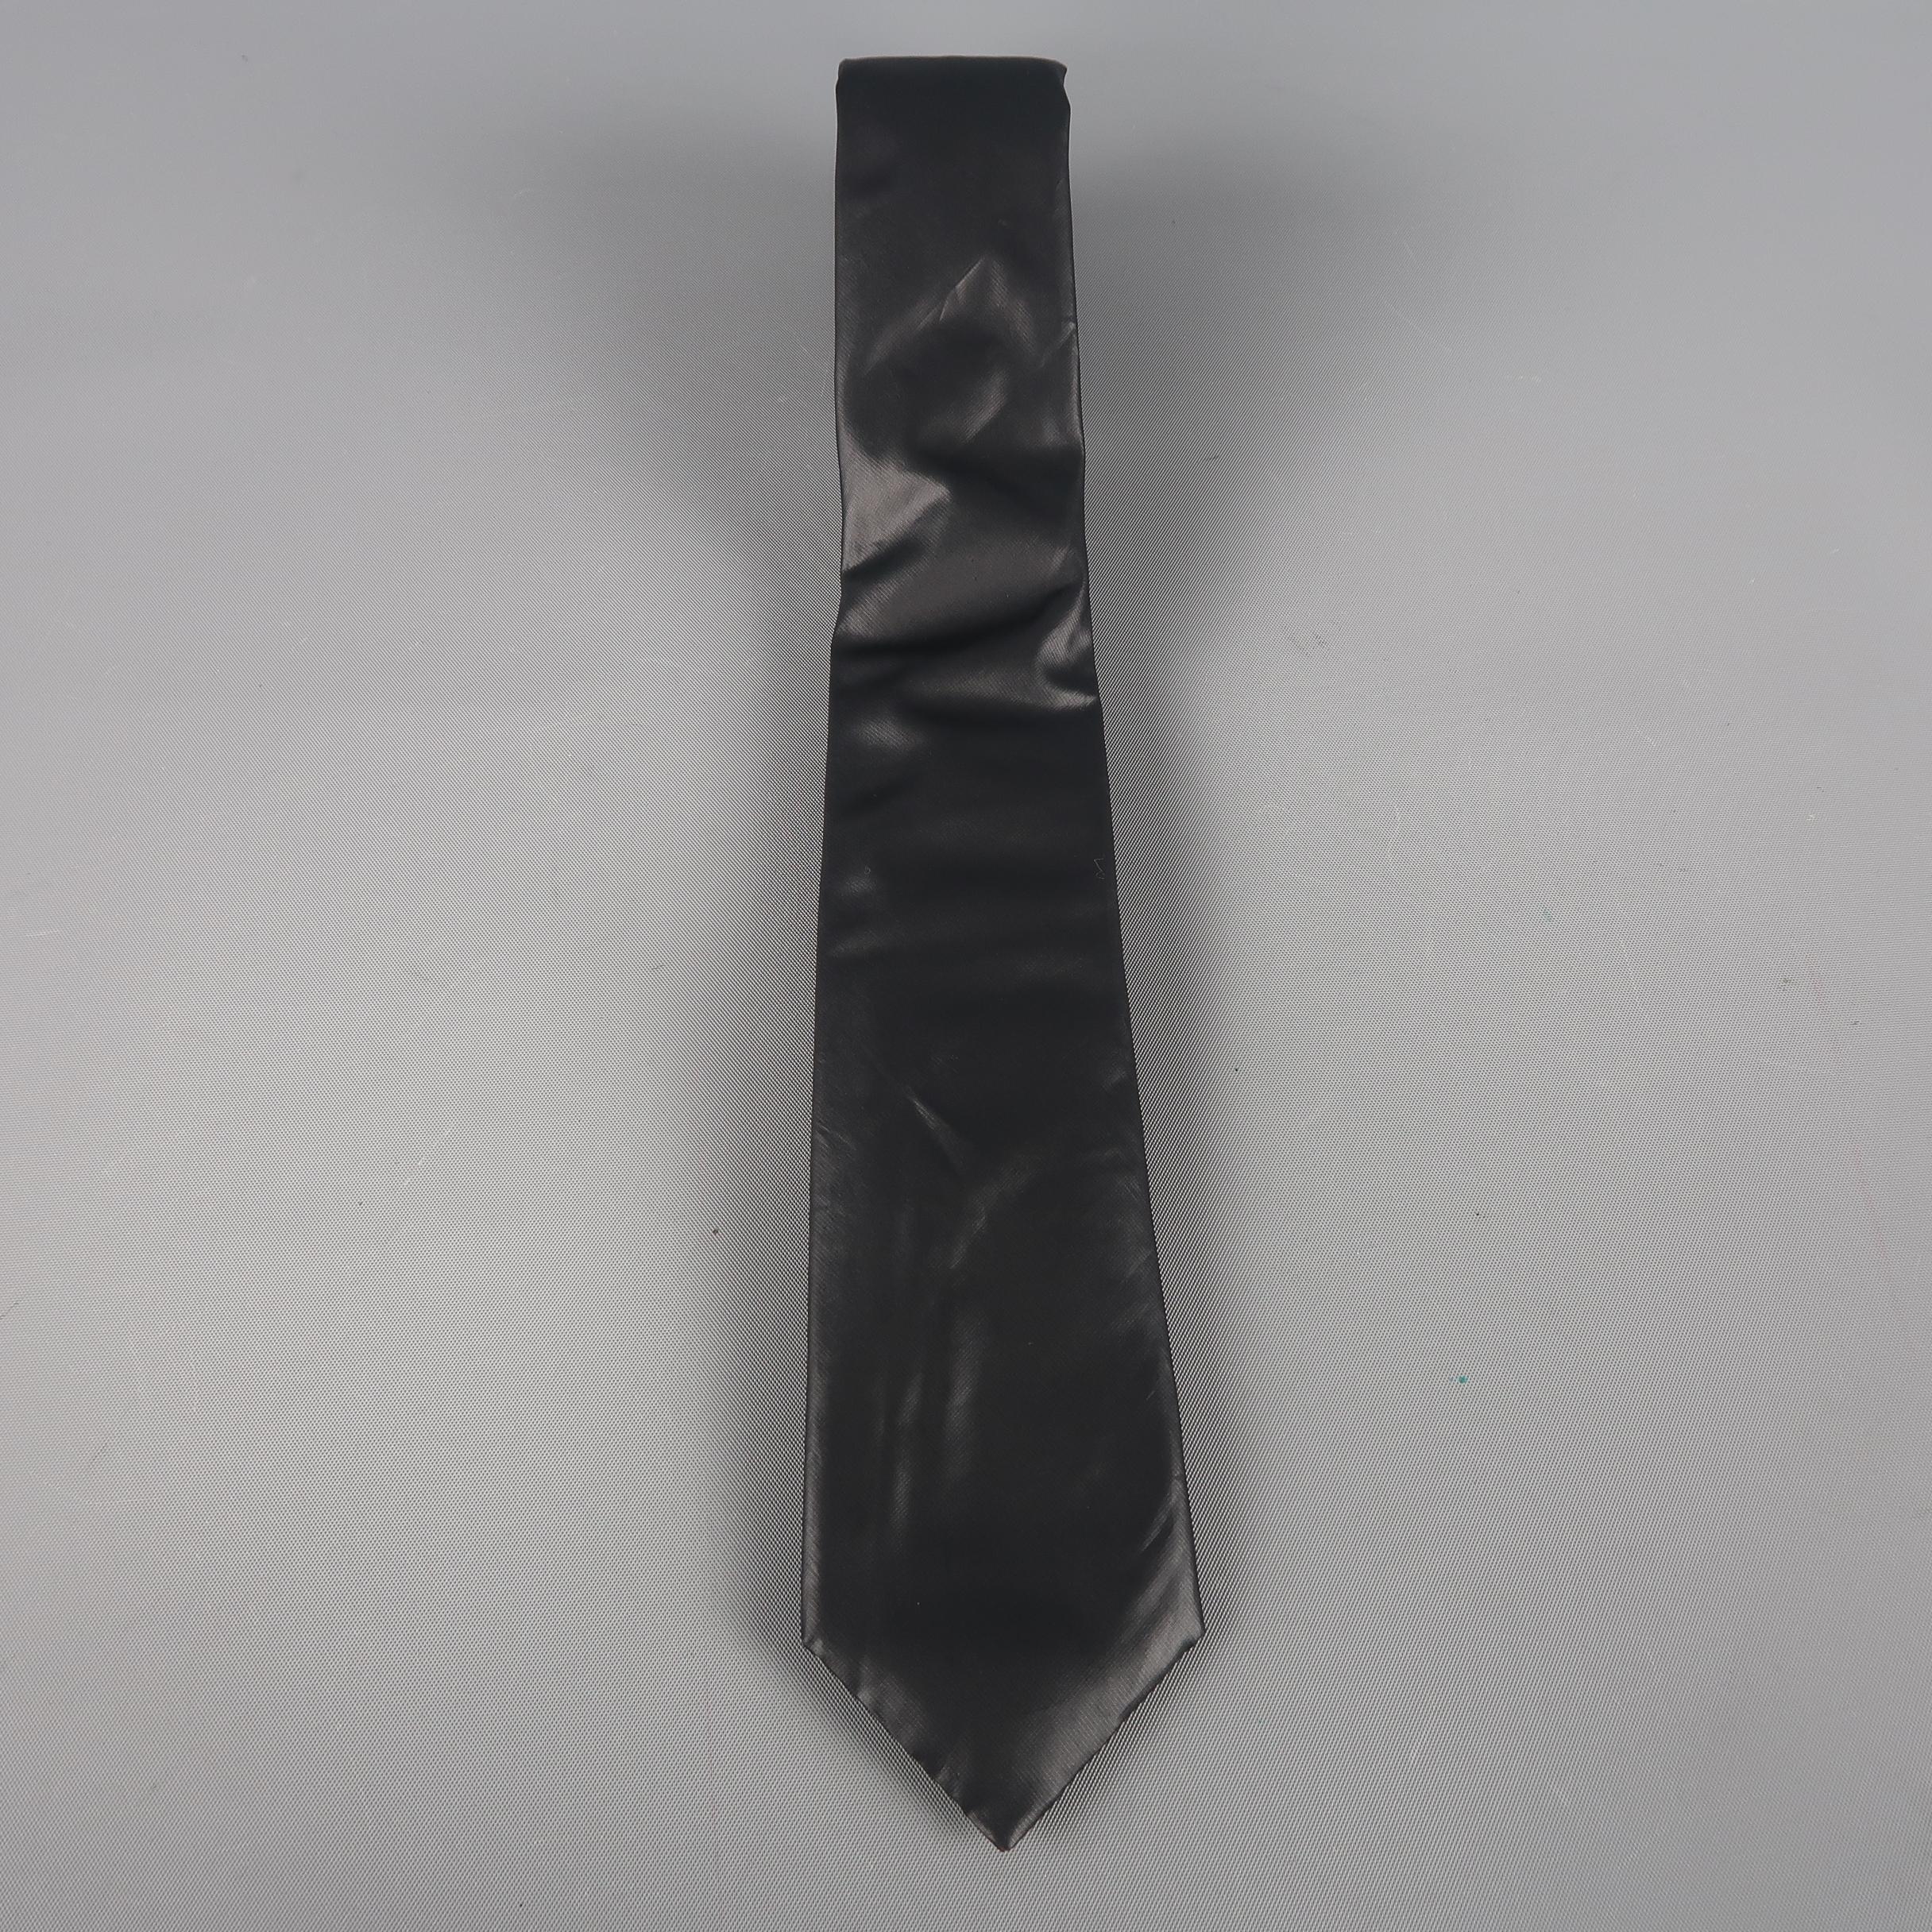 JIL SANDER  tie come in black solid polyester. Made in Italy.
 
Excellent Pre-Owned Condition.
 
Width: 2.5 in.